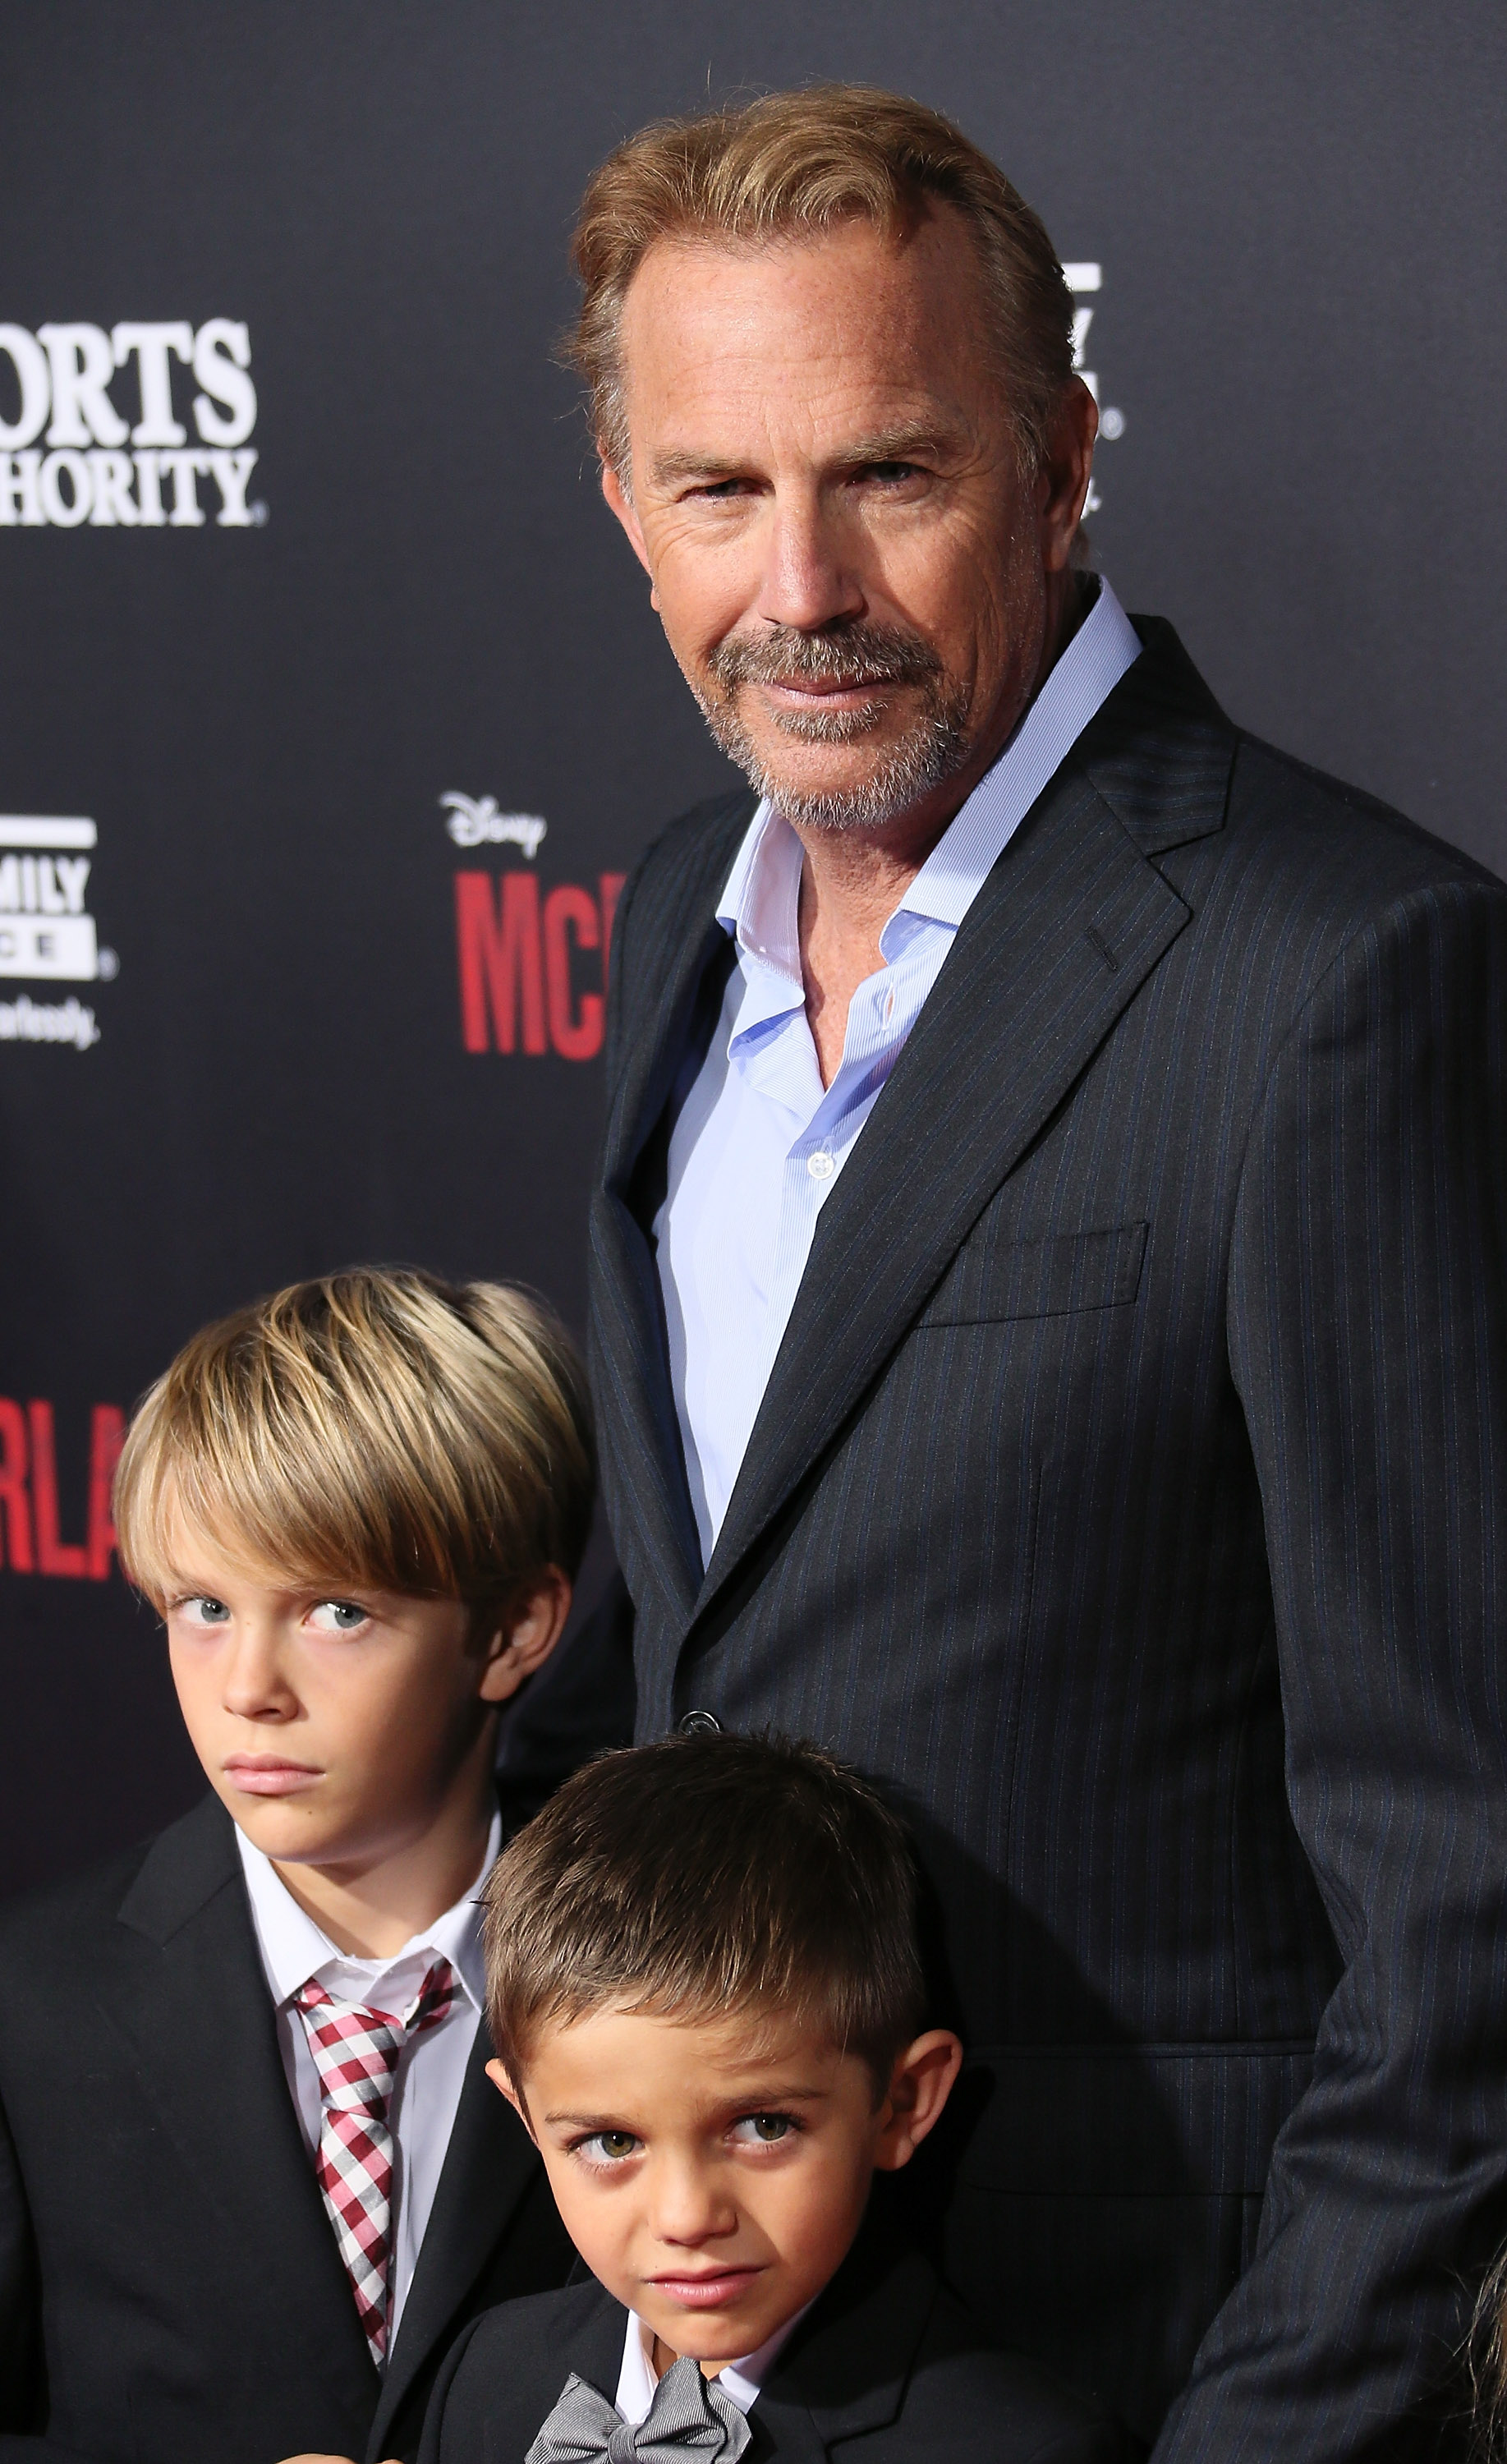 Kevin Costner and his sons at the premiere of "McFarland, USA" at the El Capitan Theatre on February 9, 2015, in Hollywood, California | Source: Getty Images